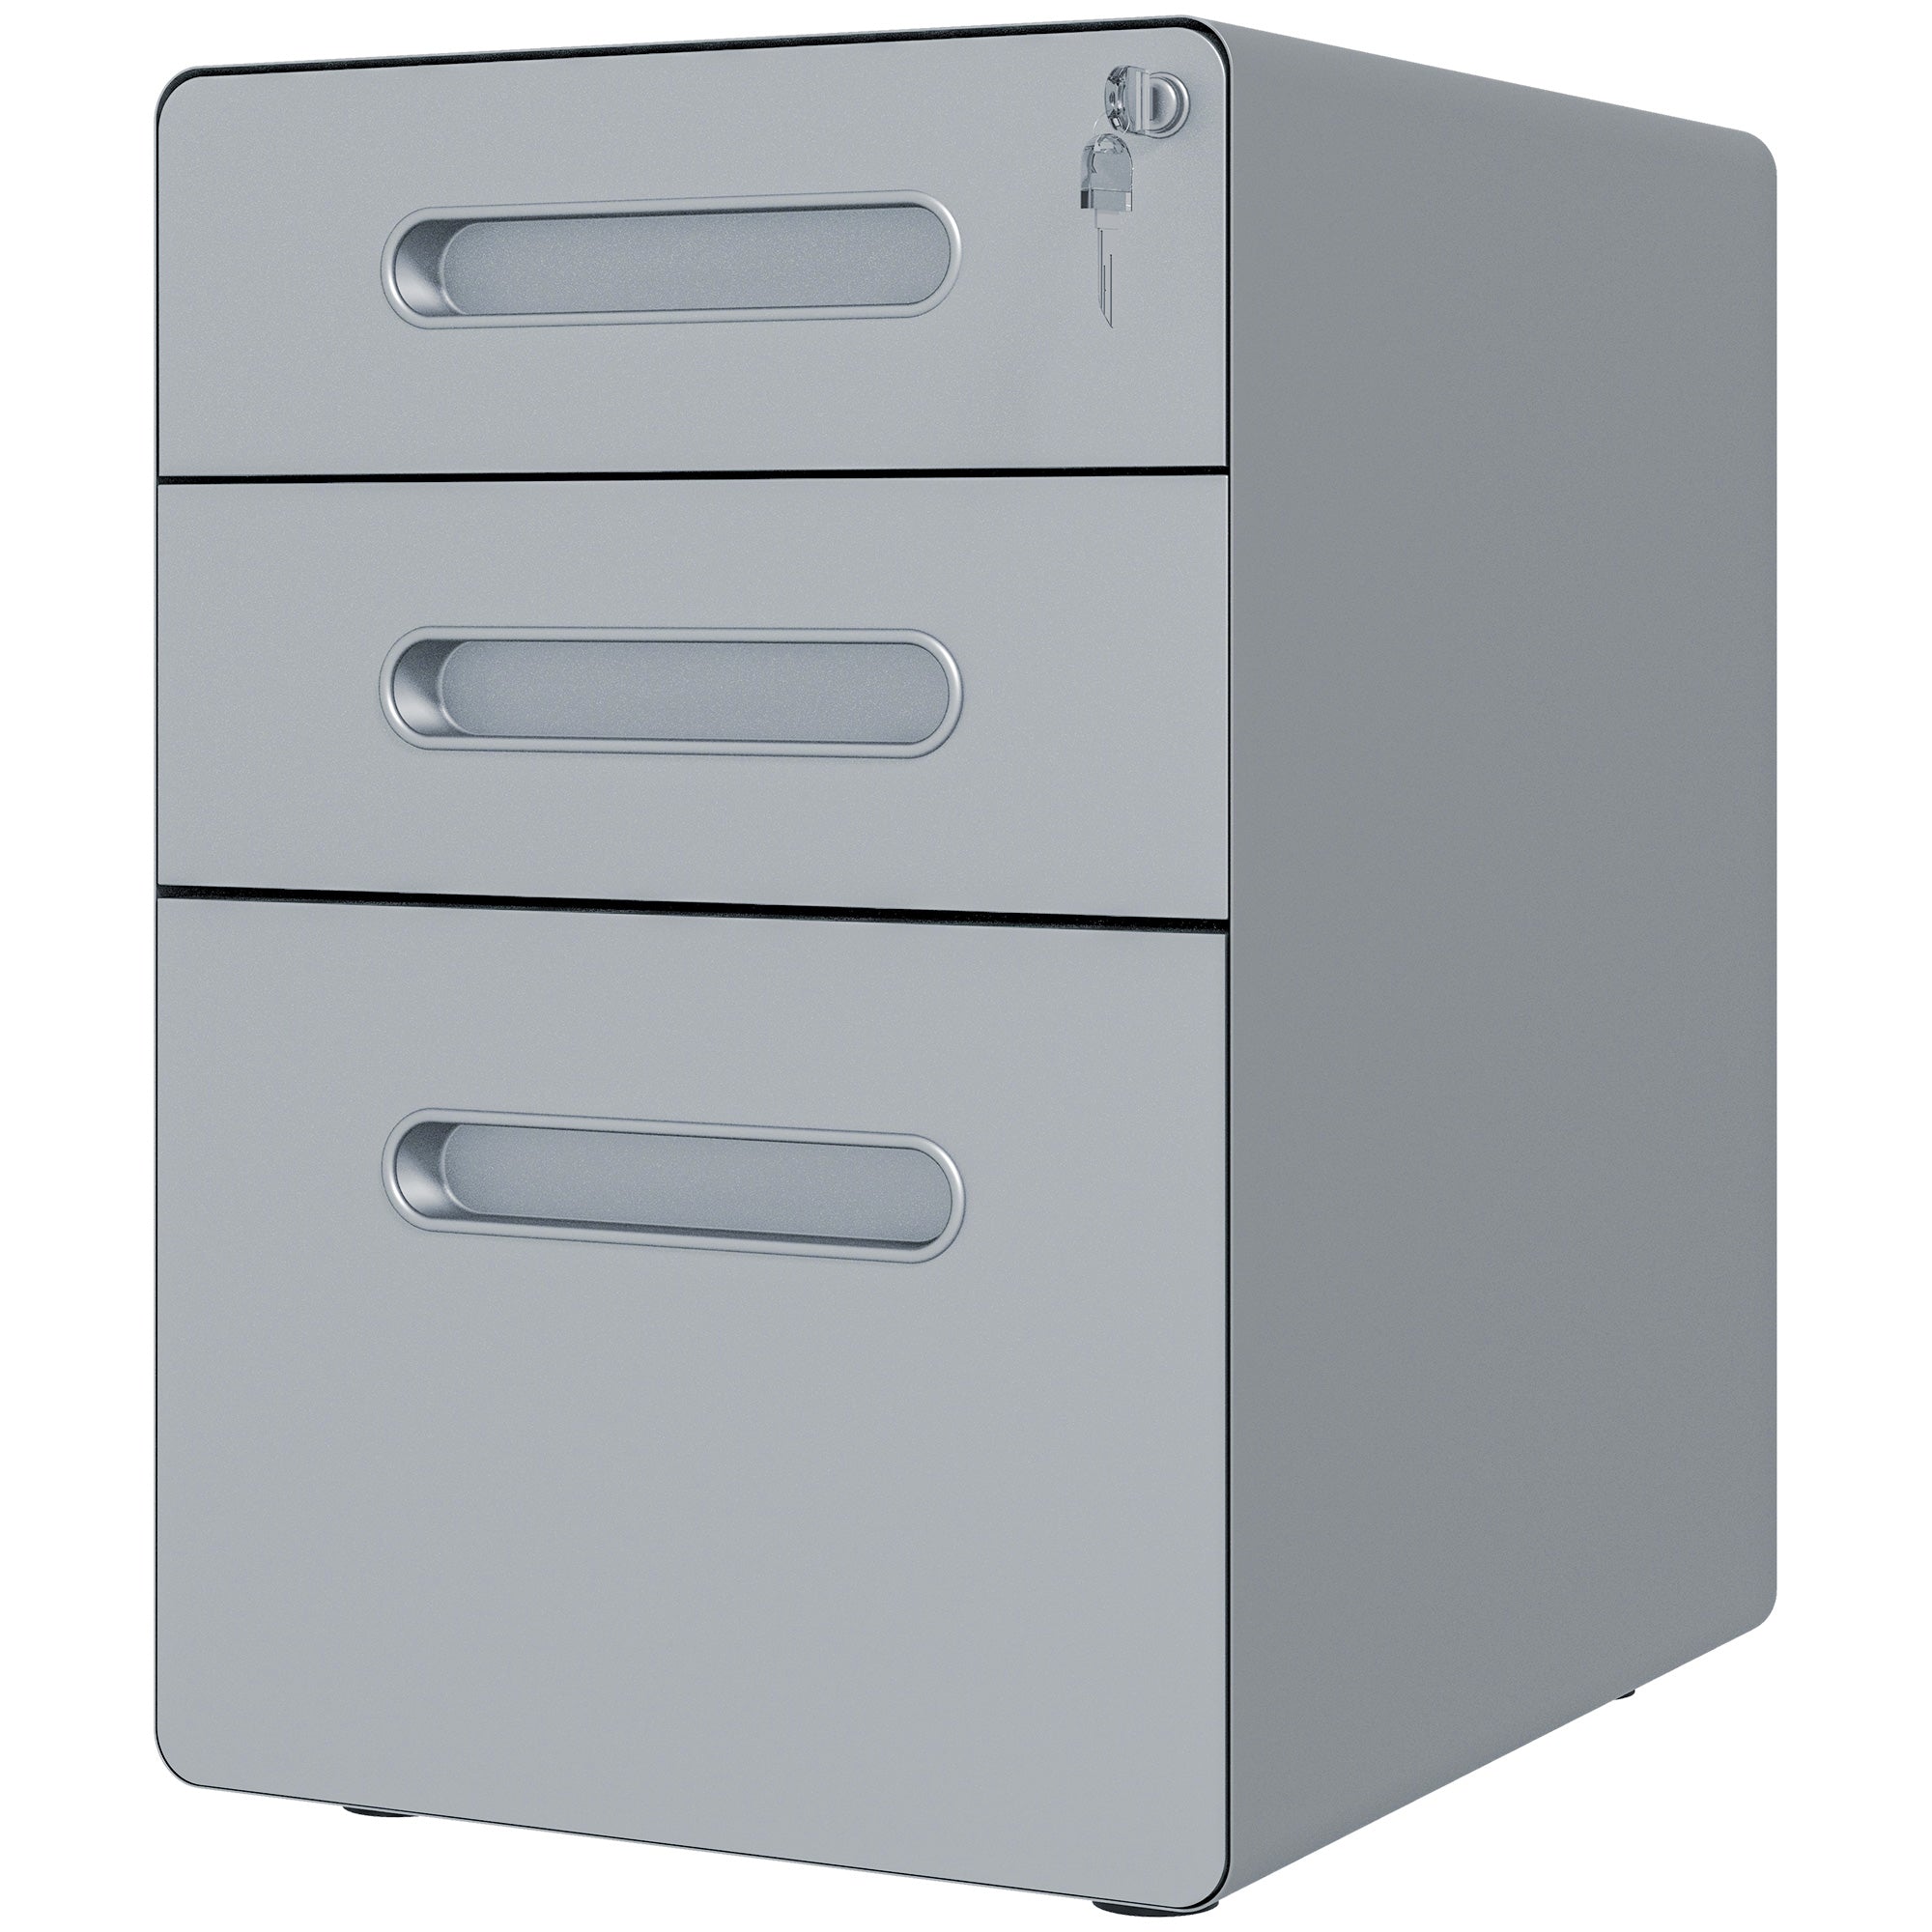 Lockable Cabinet, Rolling Filing Cabinet with 3 Drawers, Steel Office Drawer Unit for A4, Letter, Legal Sized Files-0